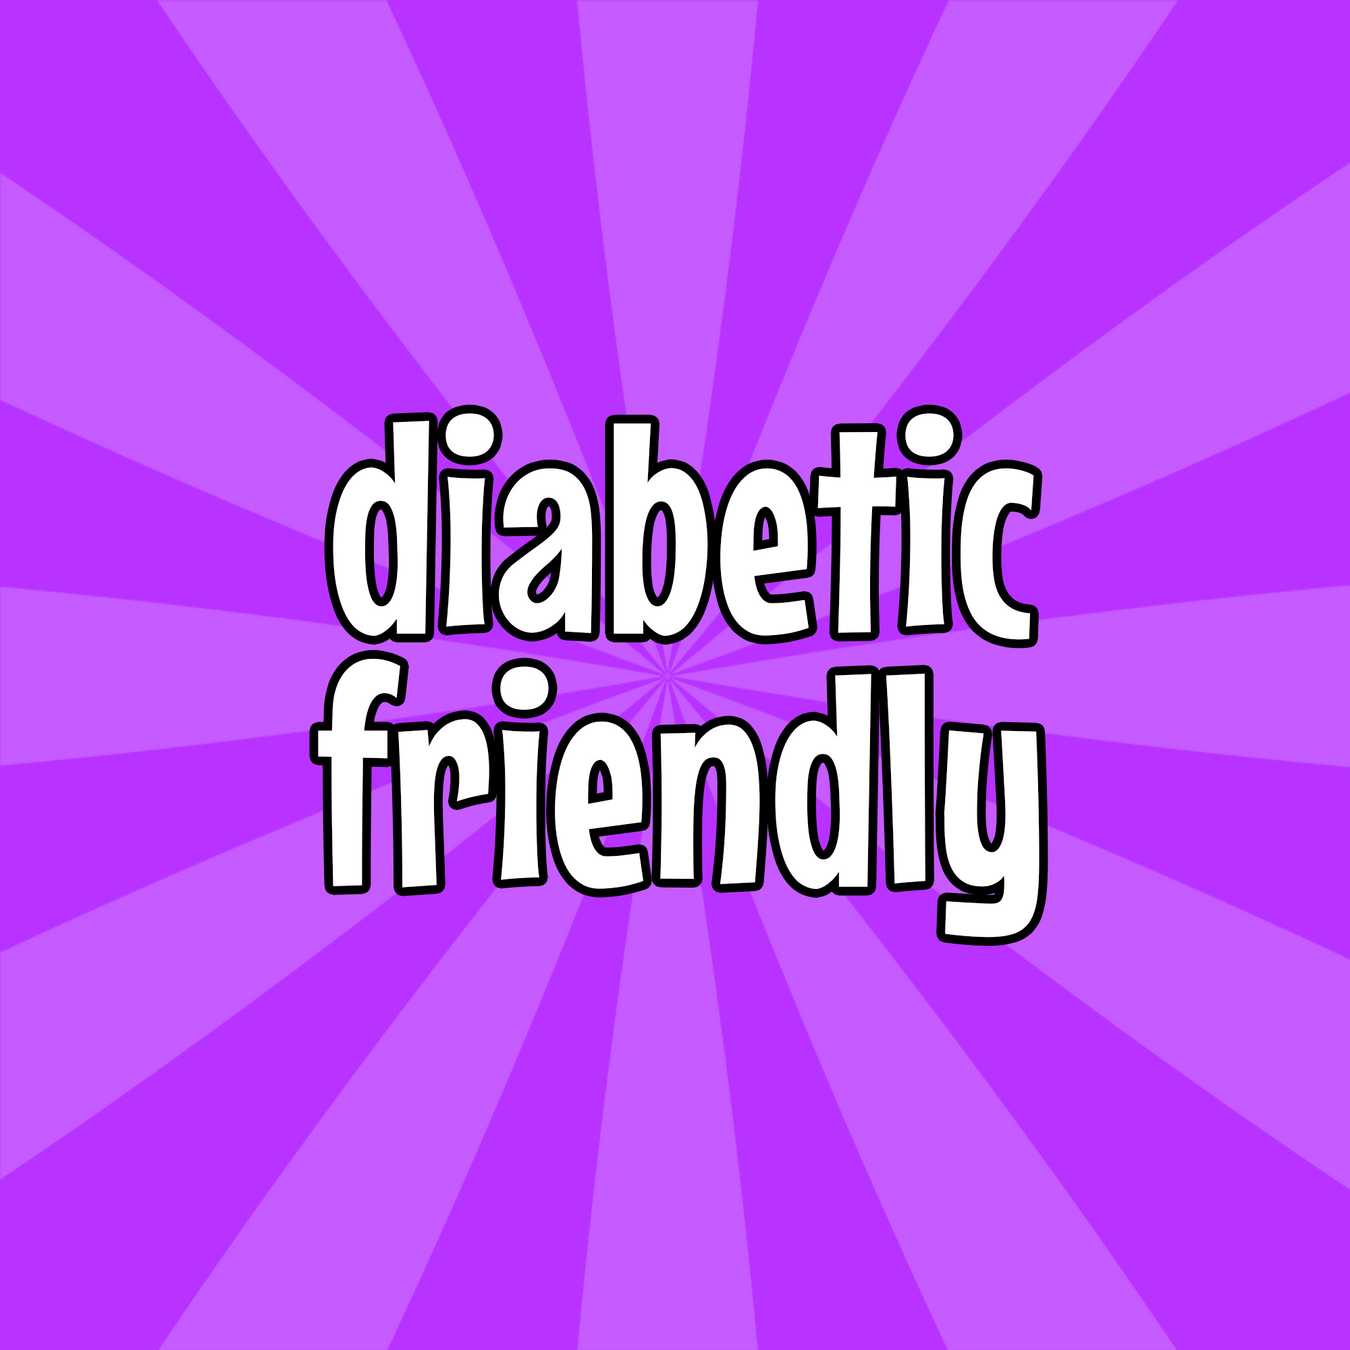 DIABETIC-friendly, Glutenfree, Low Carb, Keto, and Banting Products